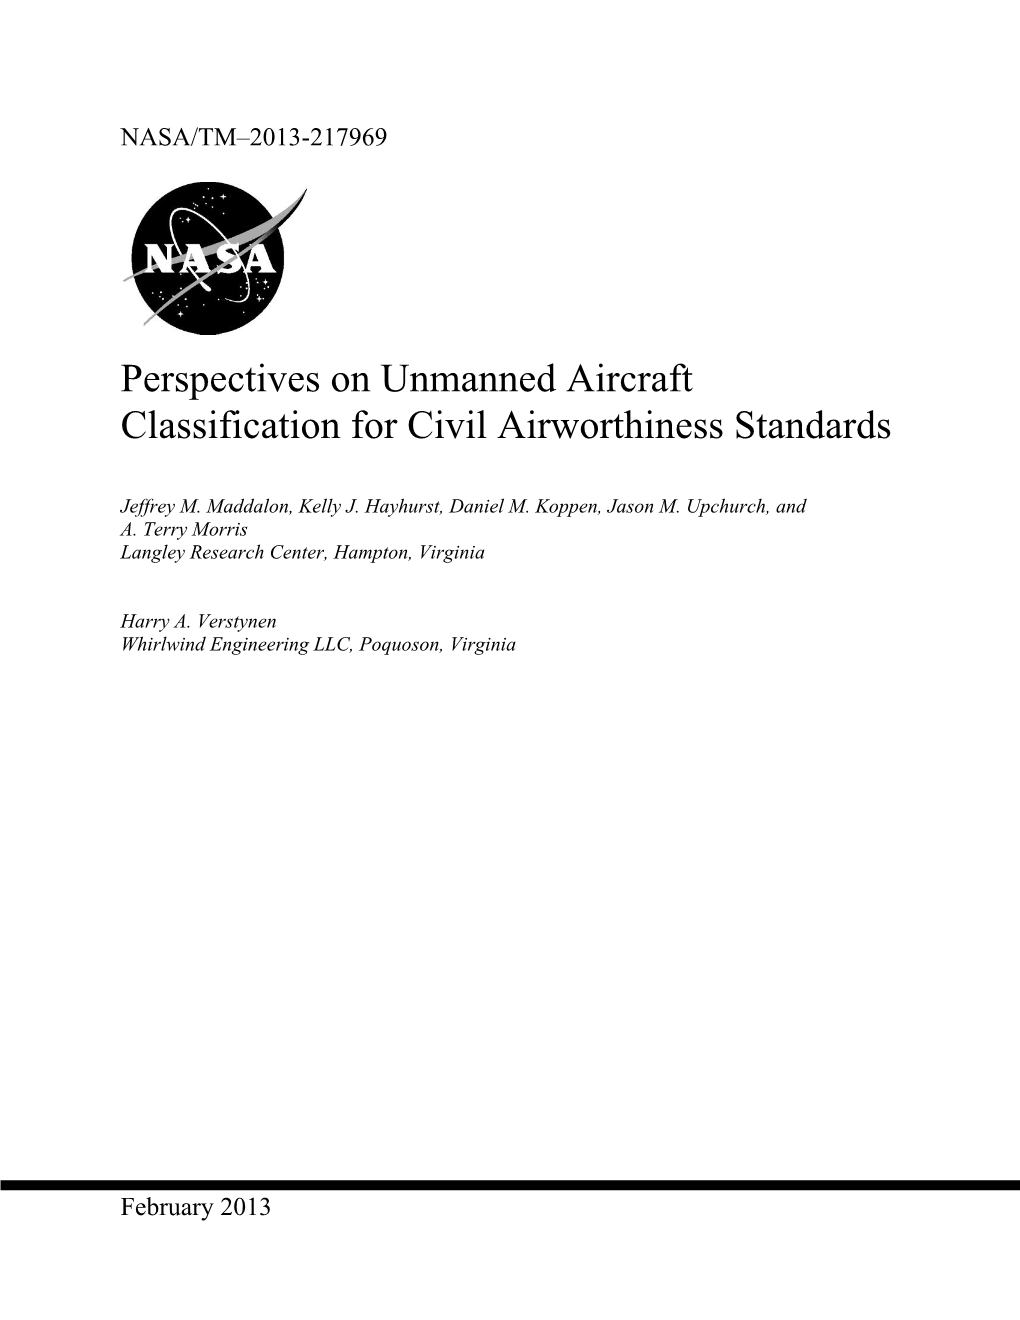 Perspectives on Unmanned Aircraft Classification for Civil Airworthiness Standards